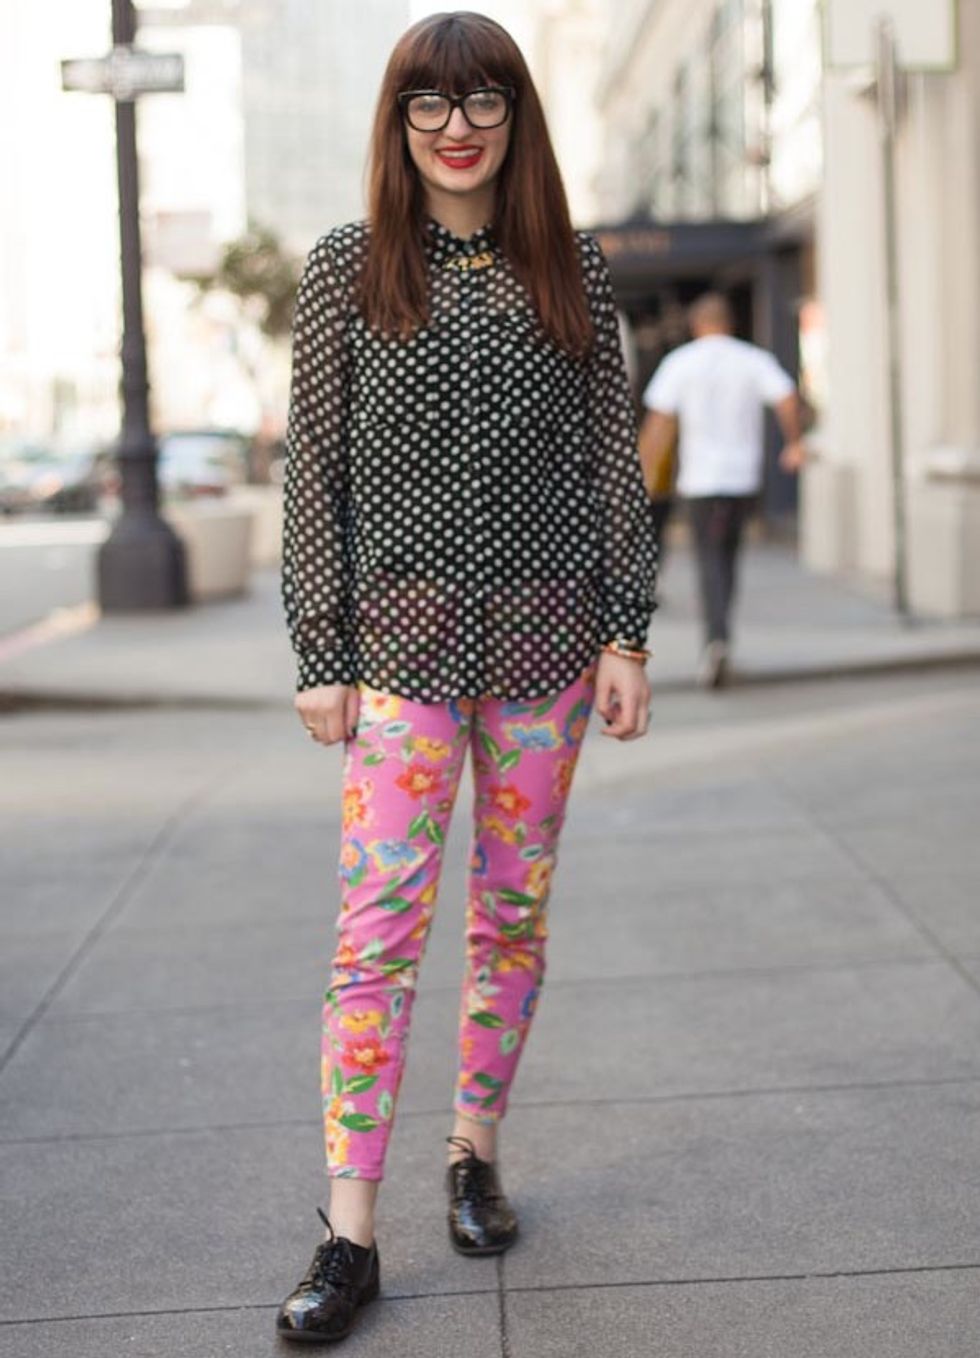 Street Style Report: A Bold Mix of Spring Prints, in Union Square